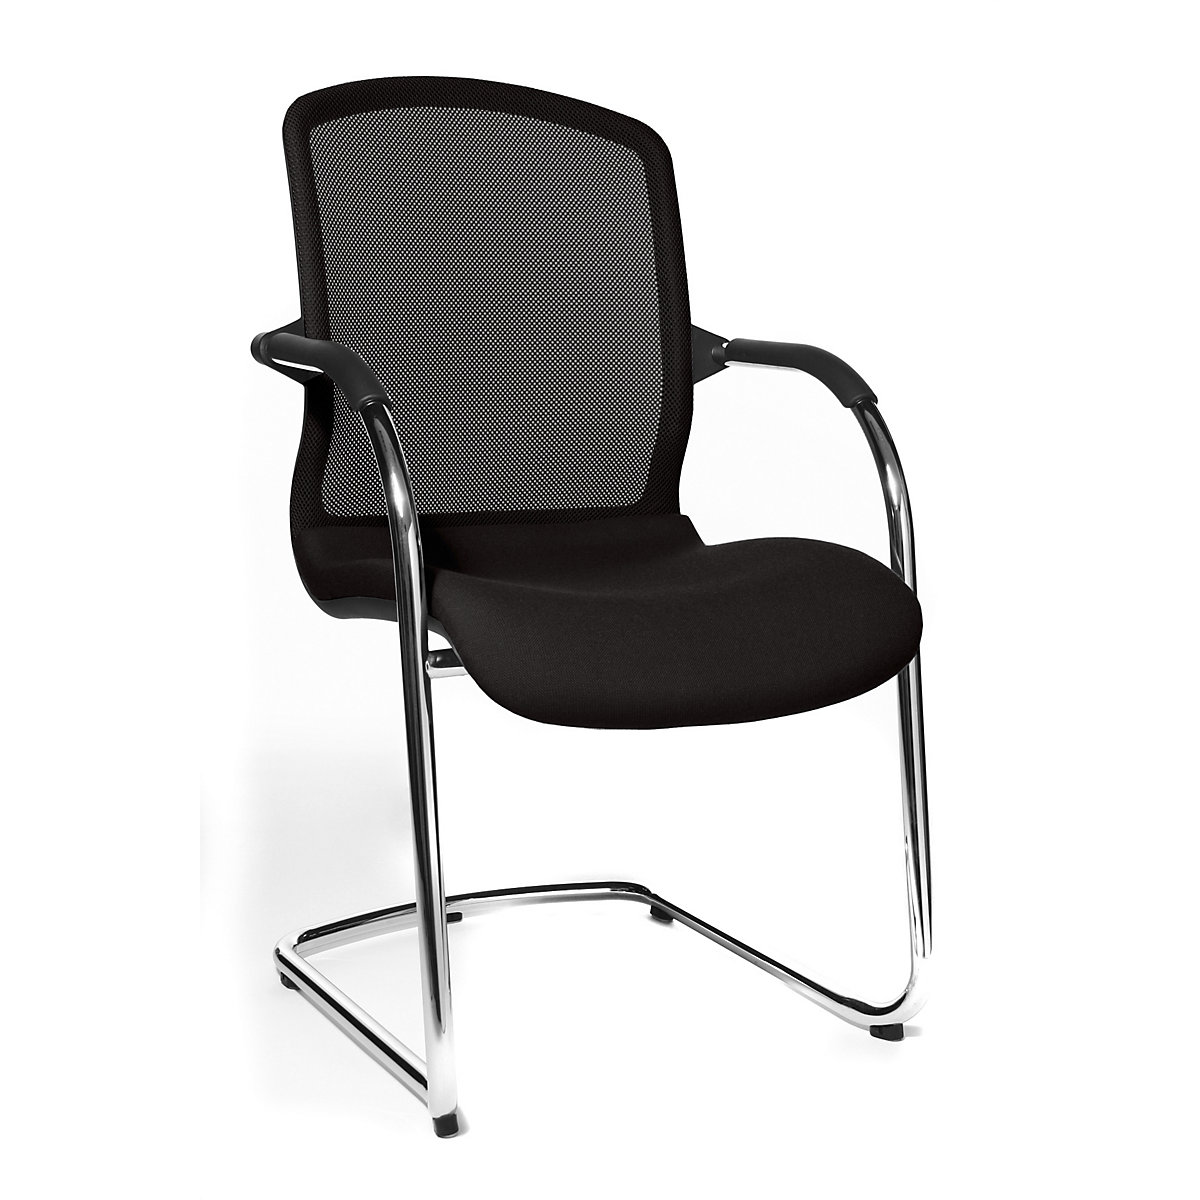 OPEN CHAIR - the designer visitor's chair - Topstar